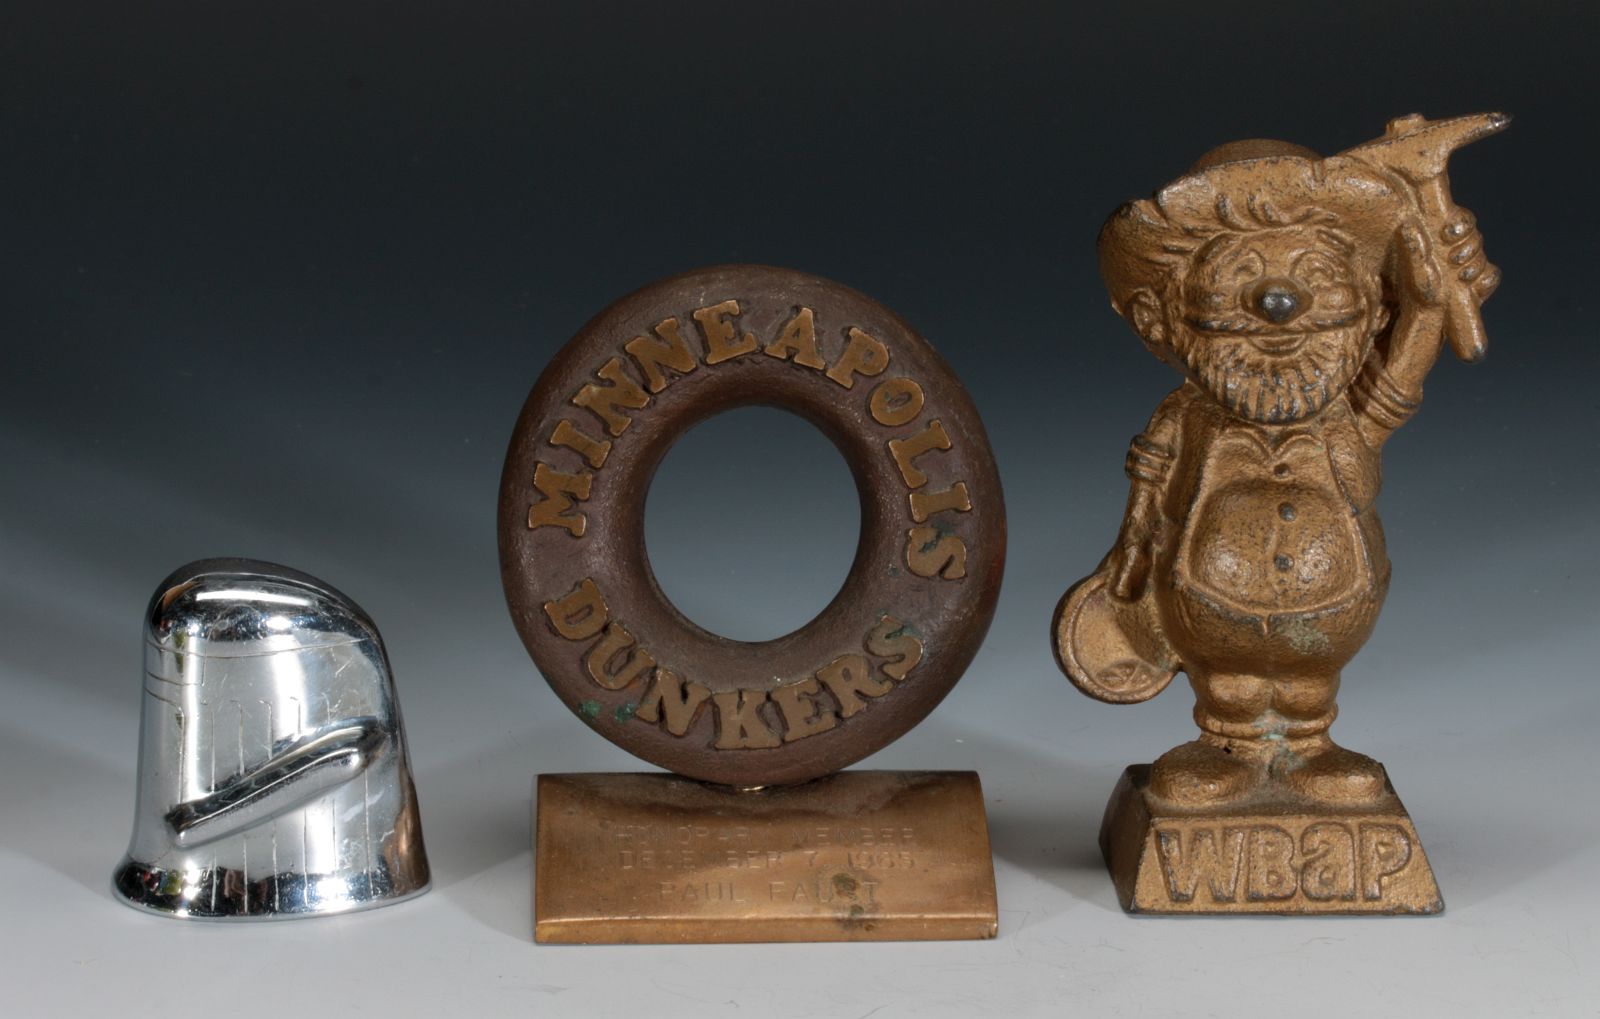 A COLLECTION OF COOL VINTAGE ADVERTISING PAPERWEIGHTS